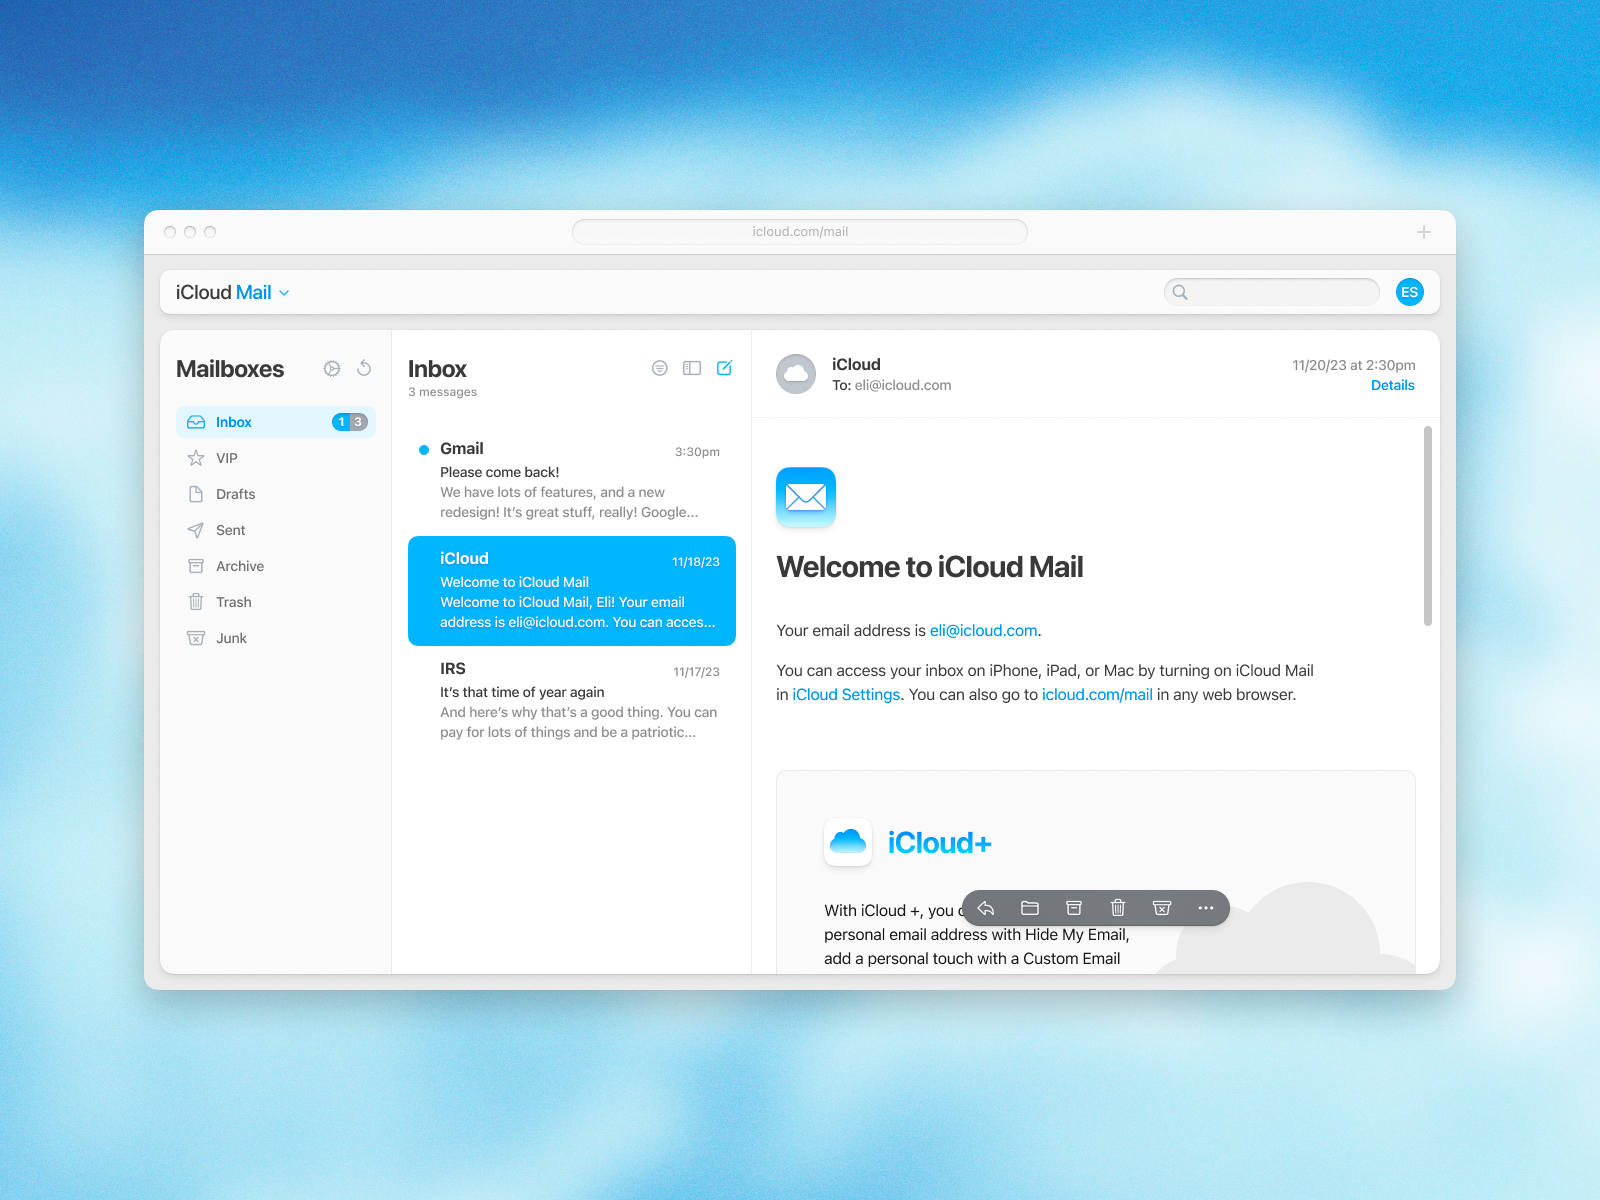 iCloud Mail is getting a shiny new interface for the web